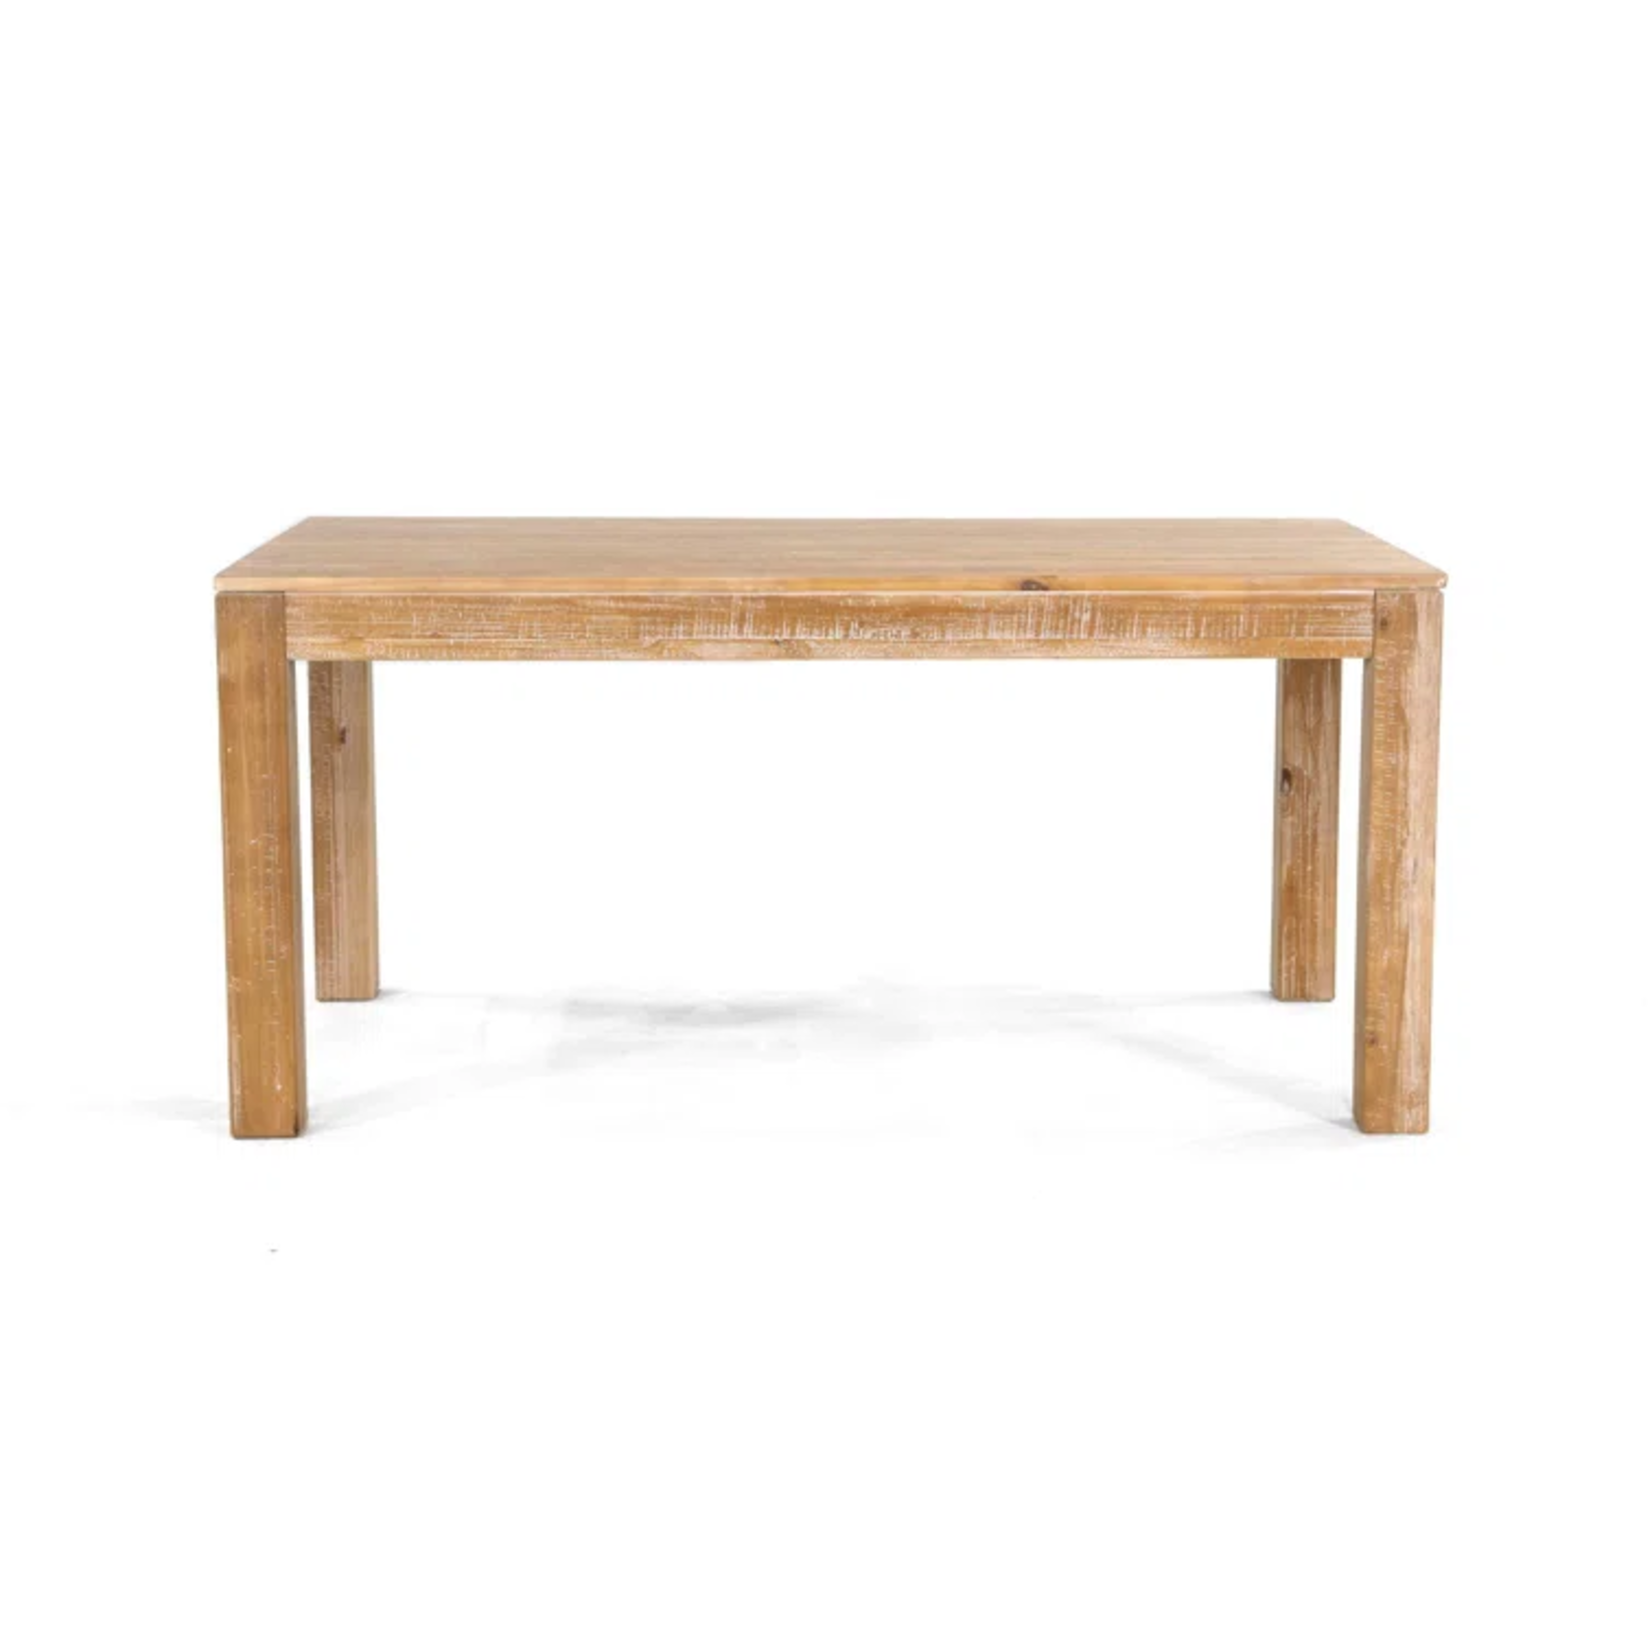 Montauk Table w/2 benches Driftwood